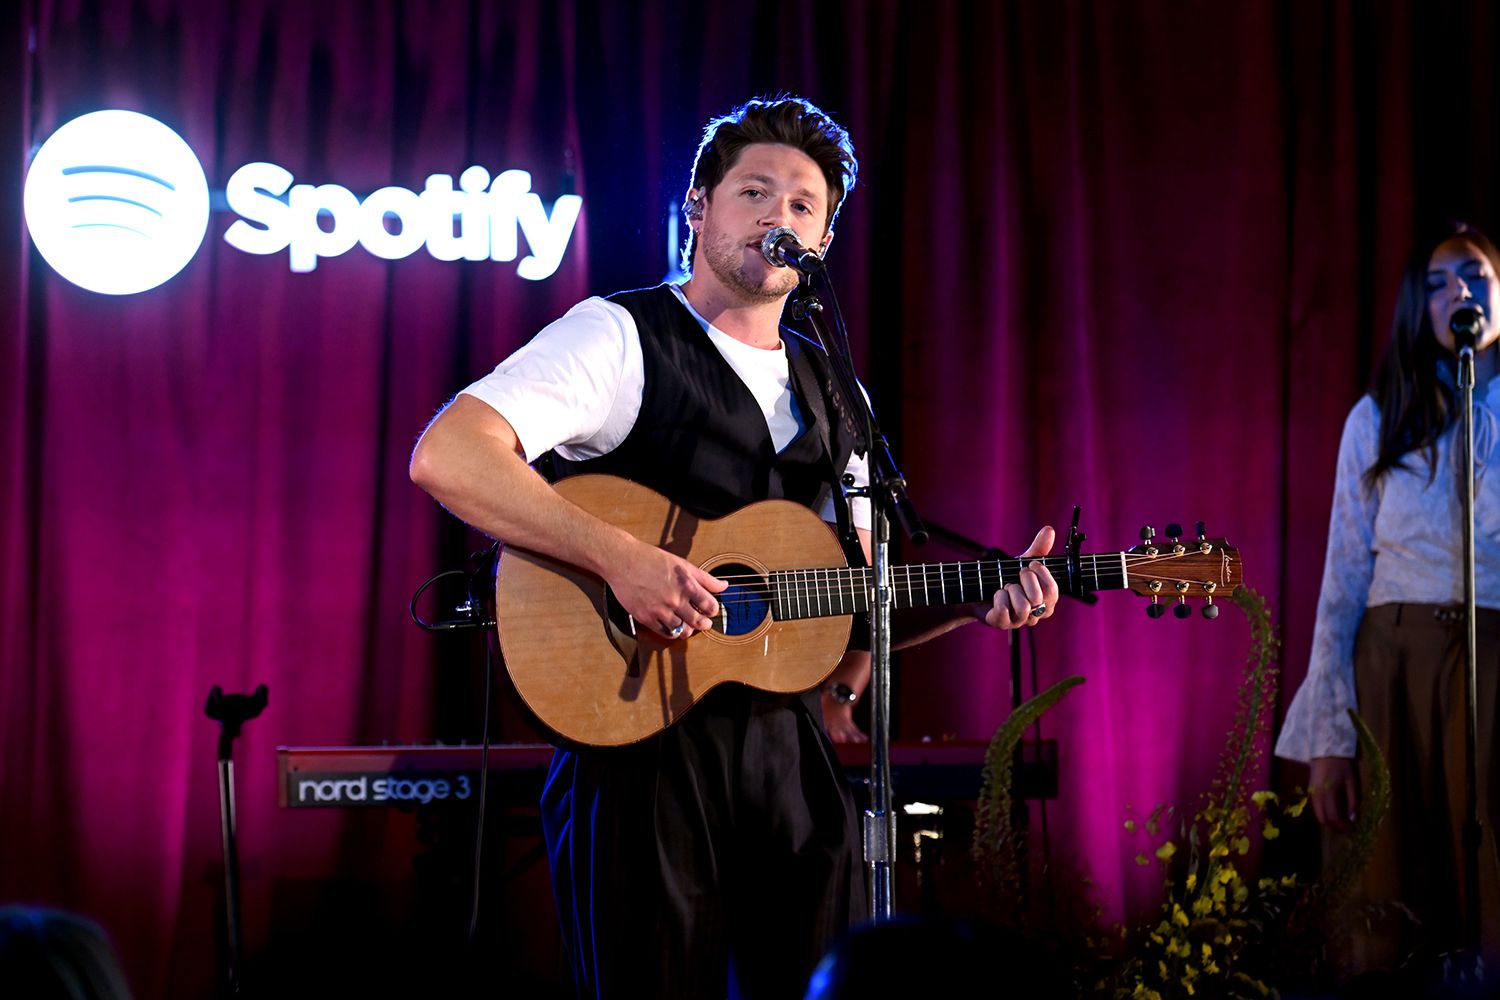 Spotify Celebrates Niall Horan's "The Show" Album Release with fans